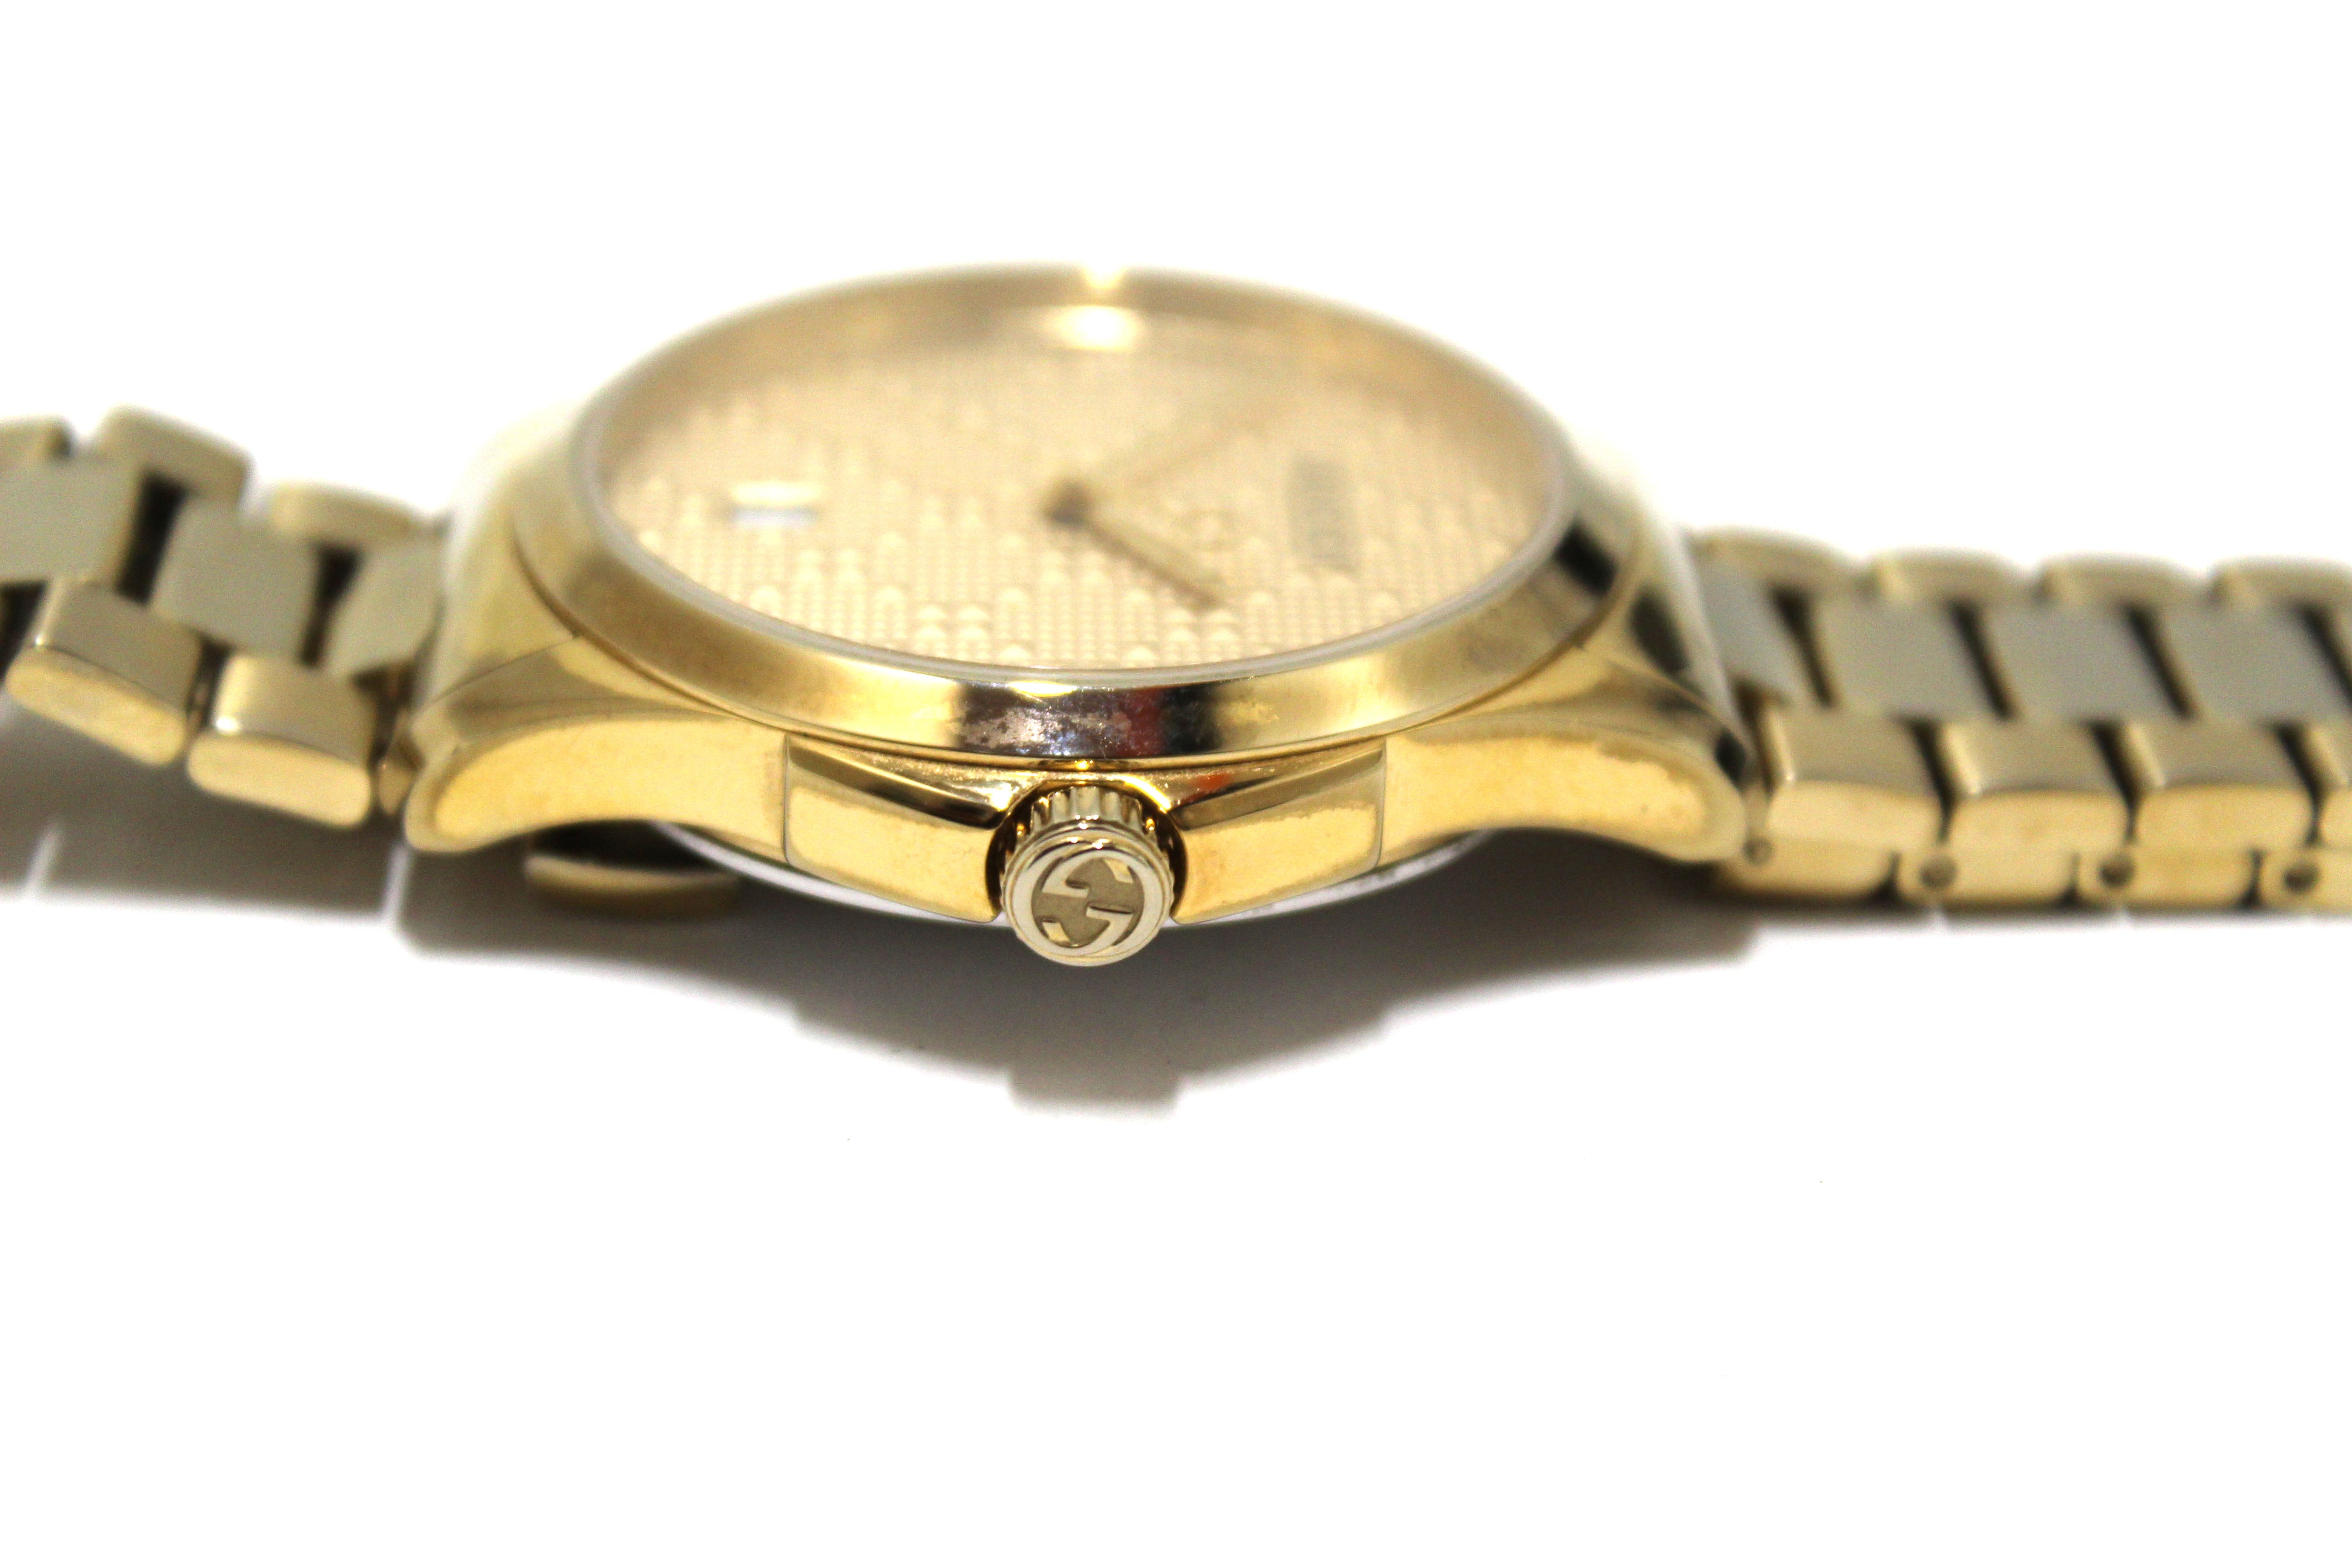 Authentic Gucci Swiss Quartz and Alloy Dress Gold-Toned Watch